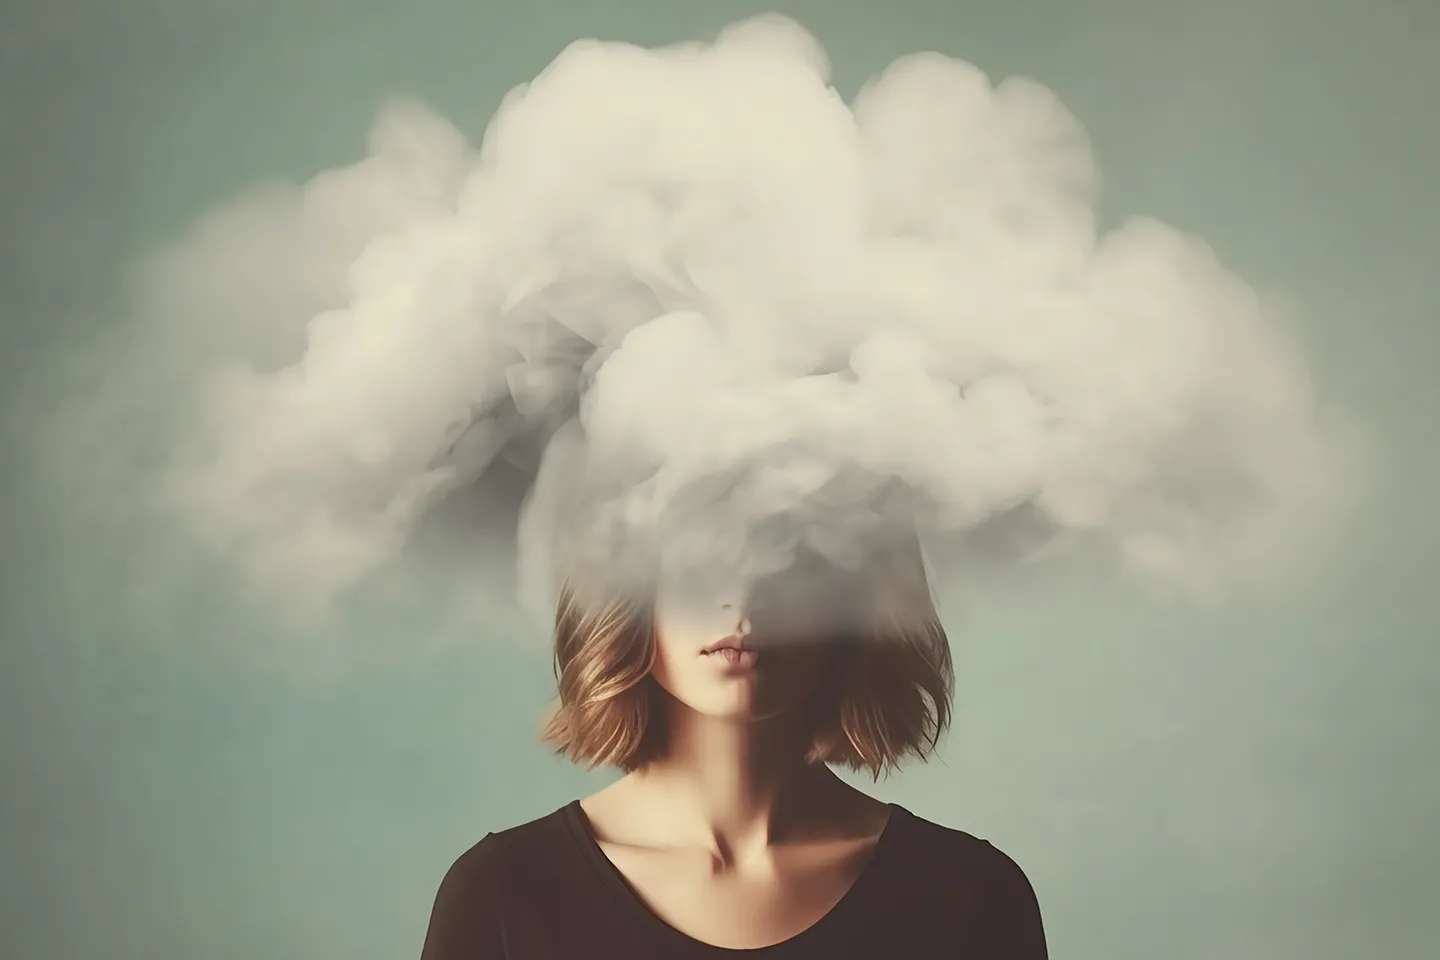 Image of a young woman with her whole head in cloud